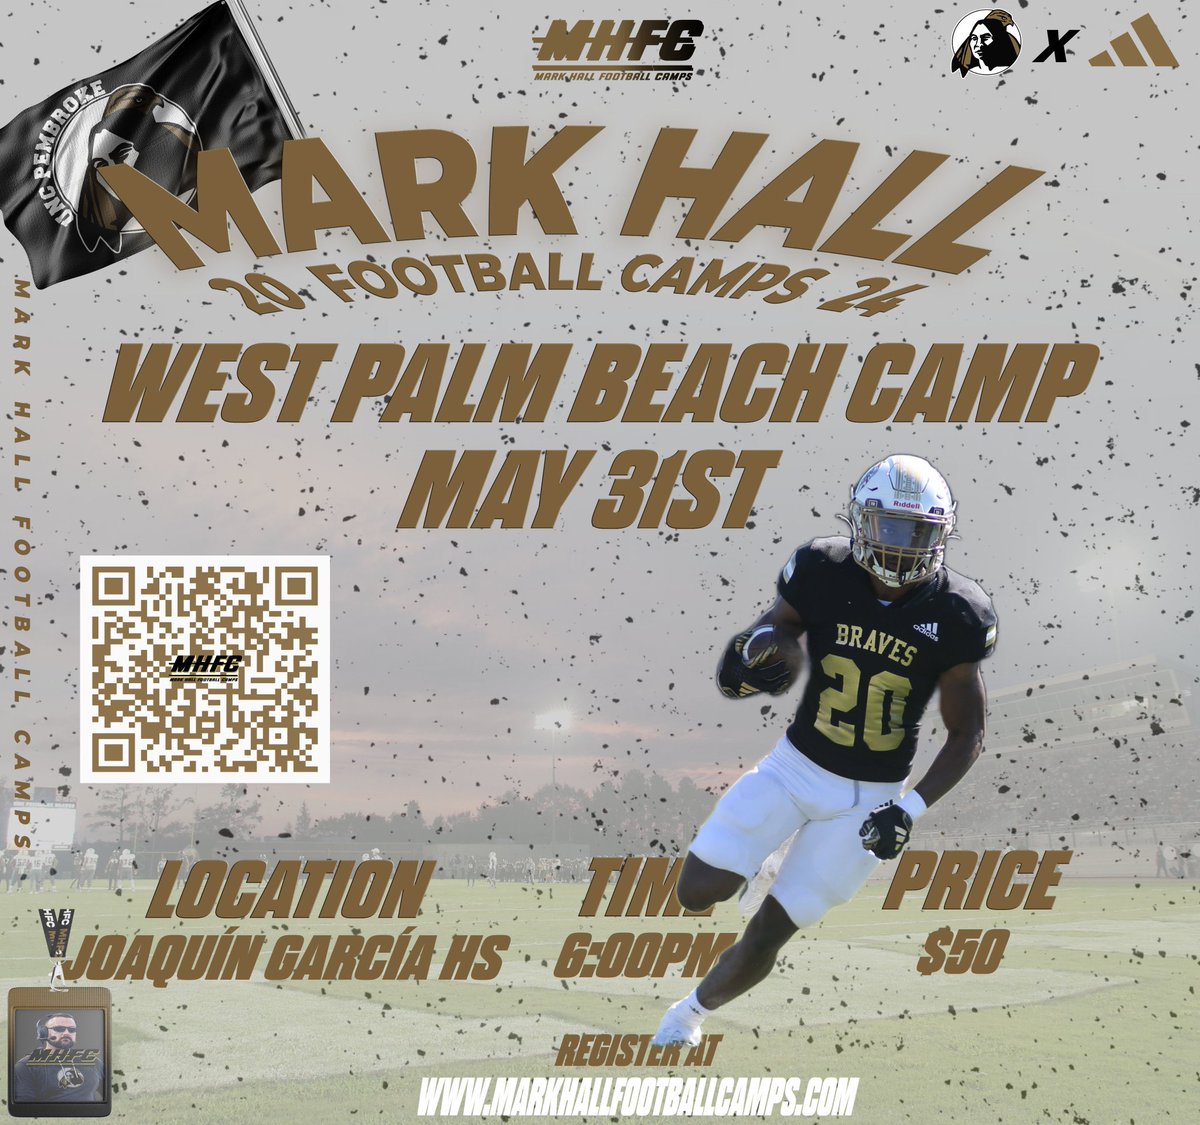 ☀️🌴2 WEEKS from today we will be in the Sunshine State!! We signed 15+ guys from Florida in our 2024 recruiting class & can’t wait to add more dawgs to #BraveNation!! Sign up now: markhallfootballcamps.com/blank